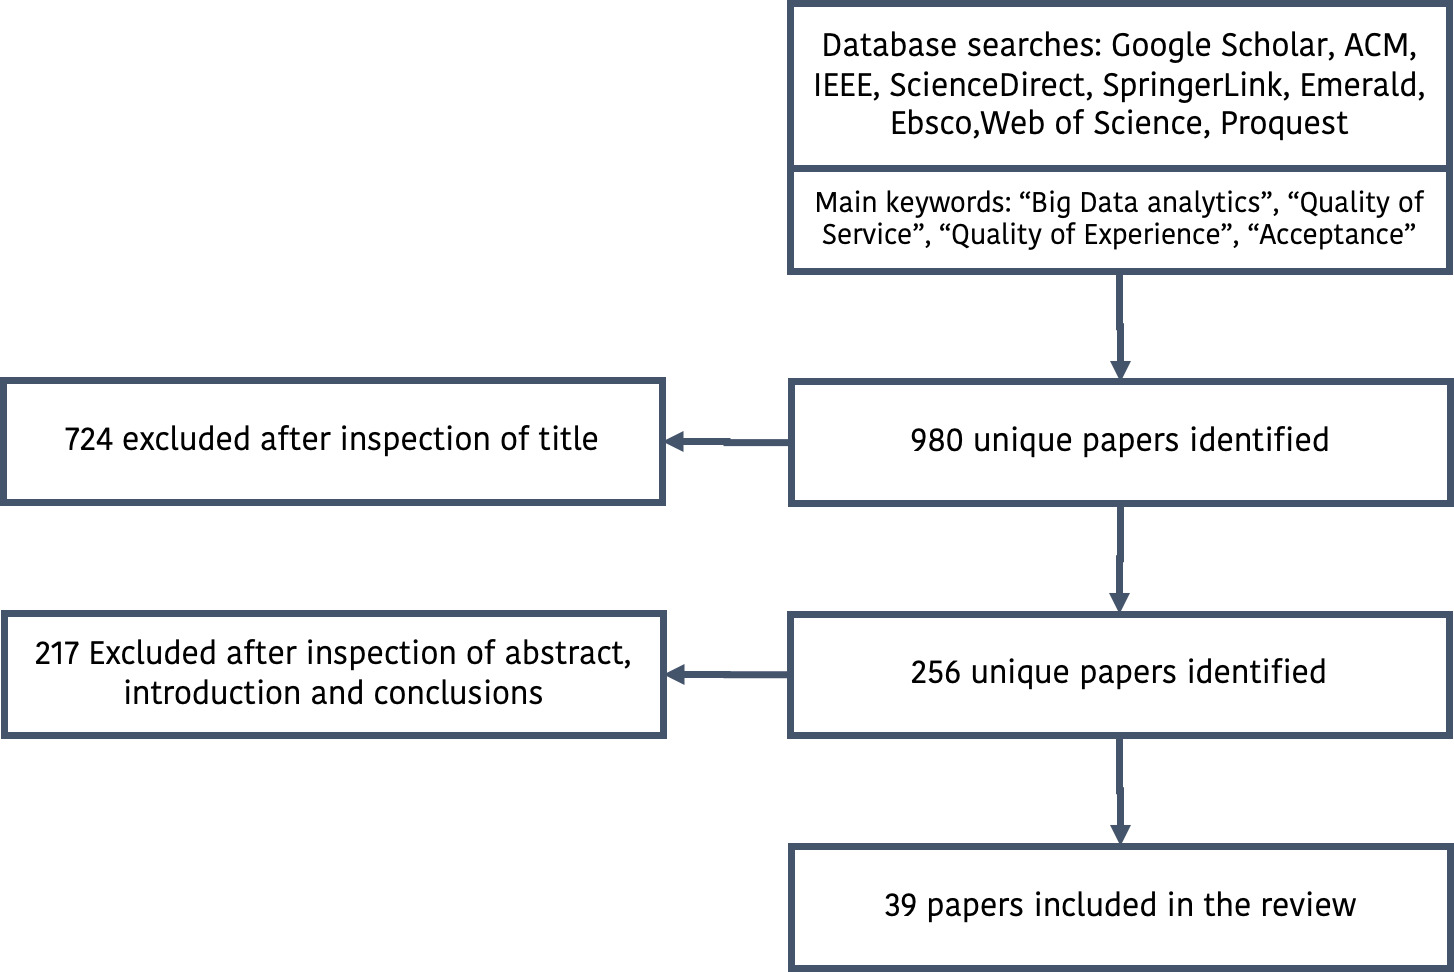 Overview of the paper identification process.